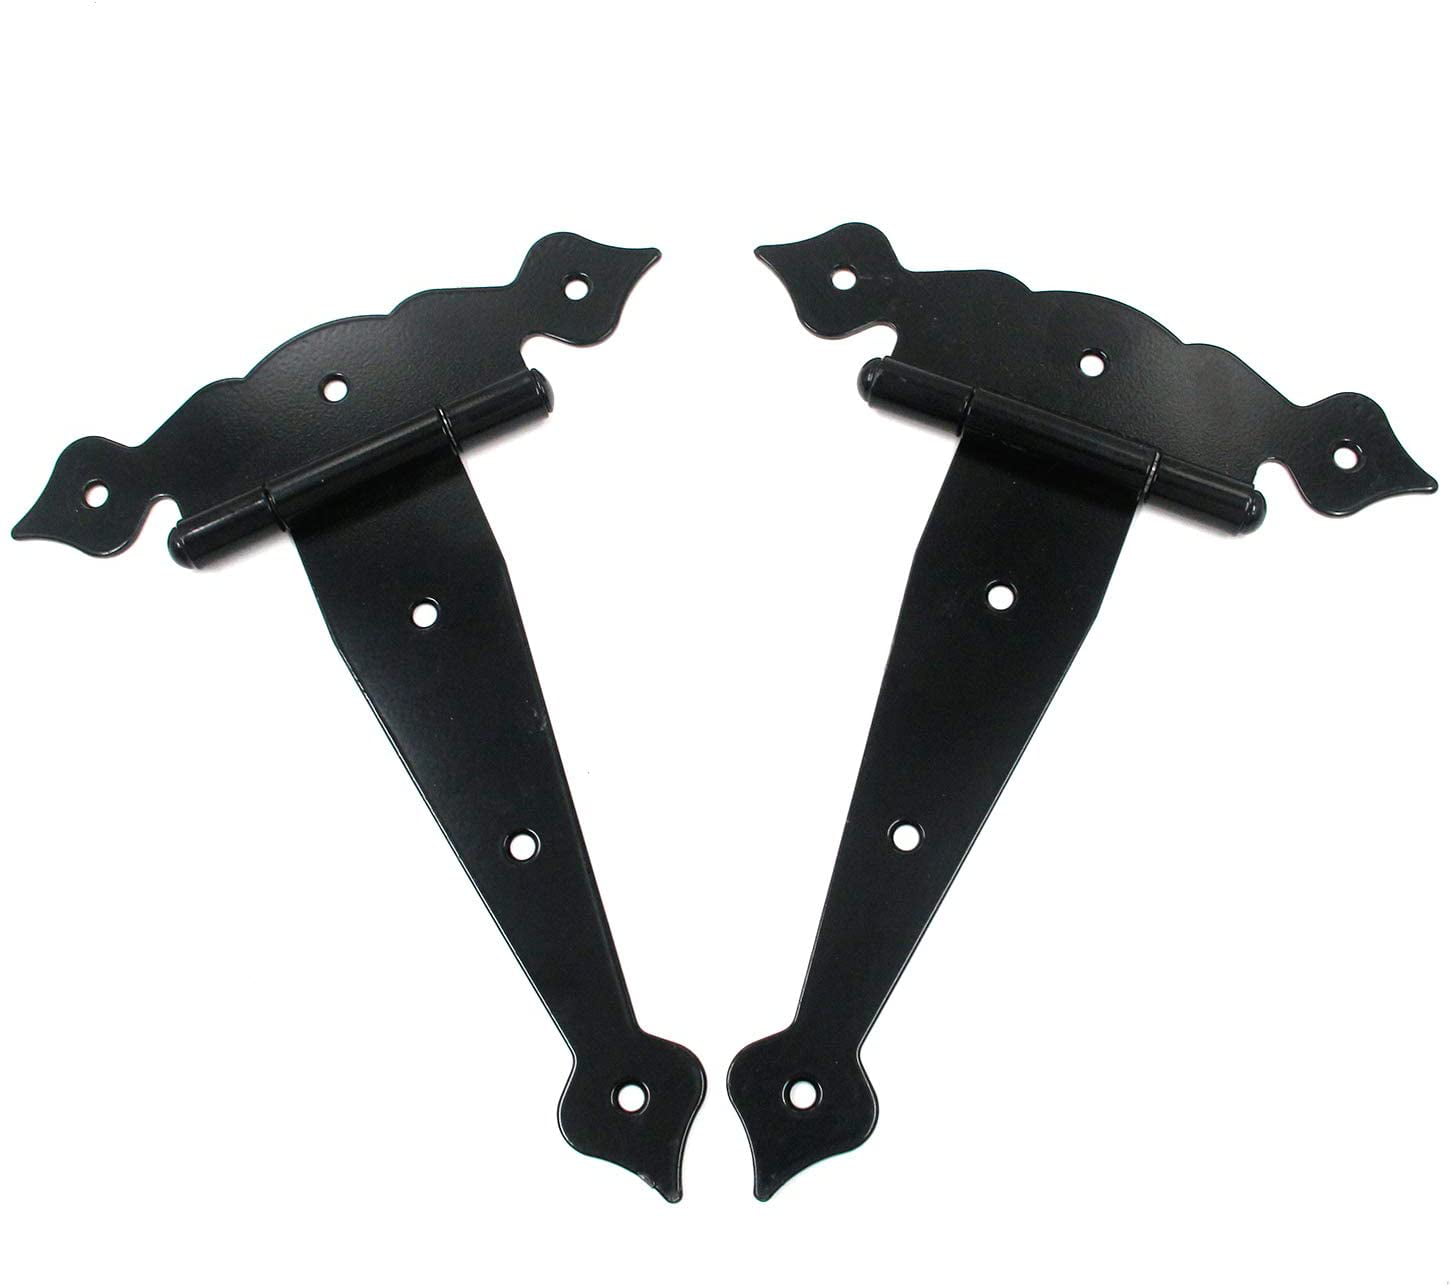 Door Hinge Gate Shed 8 Inch Black Heavy Duty Decorative Strap 2 Pack B14 